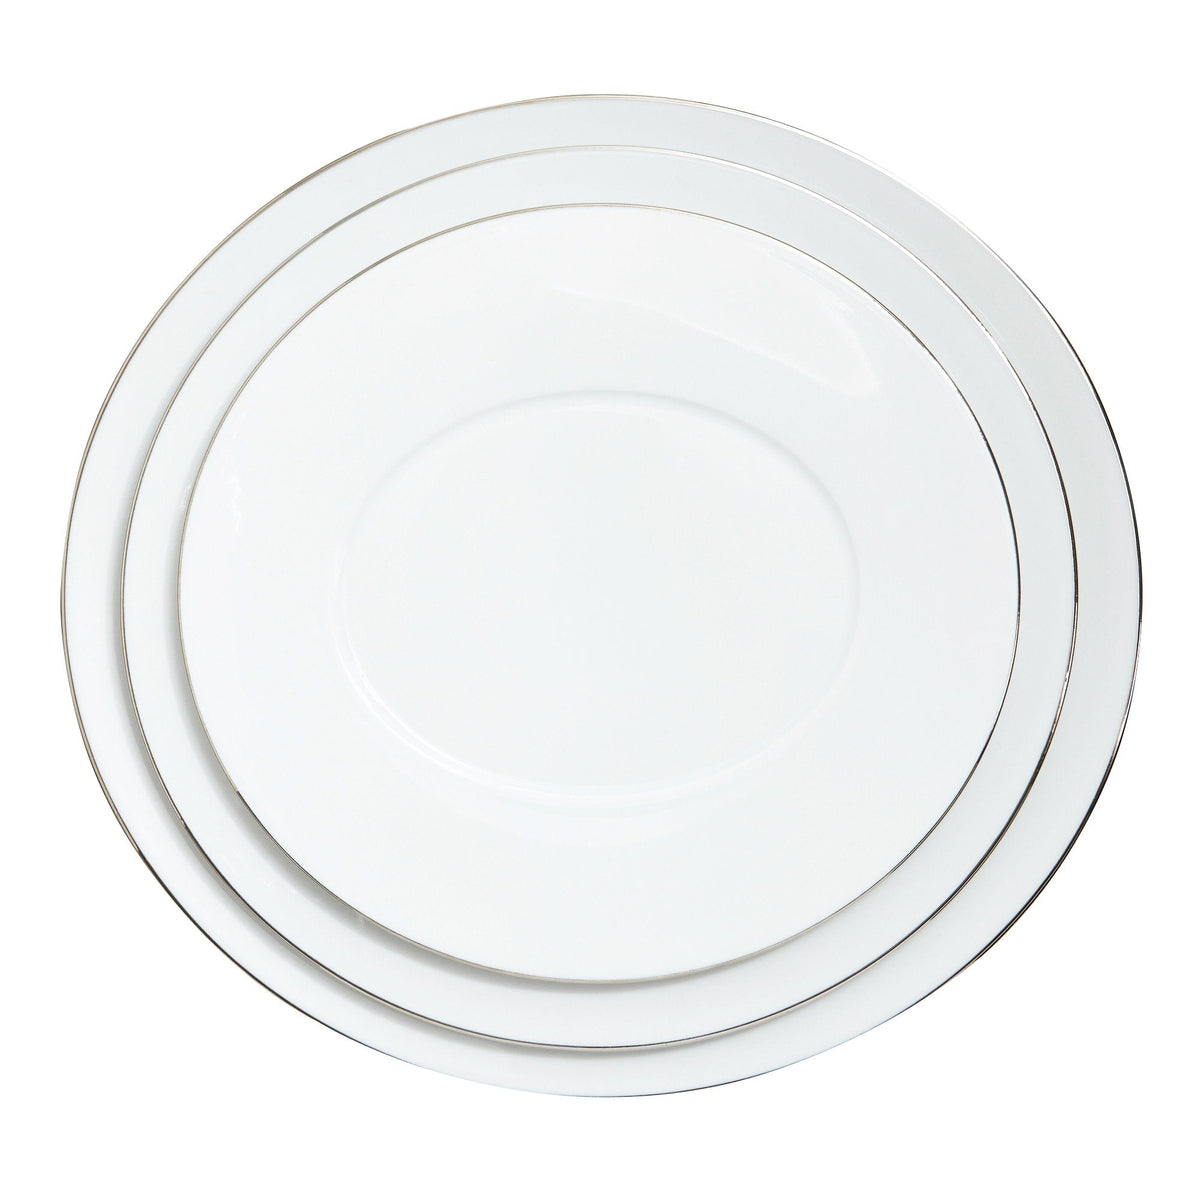 Epure Platinum Oval Charger Plate